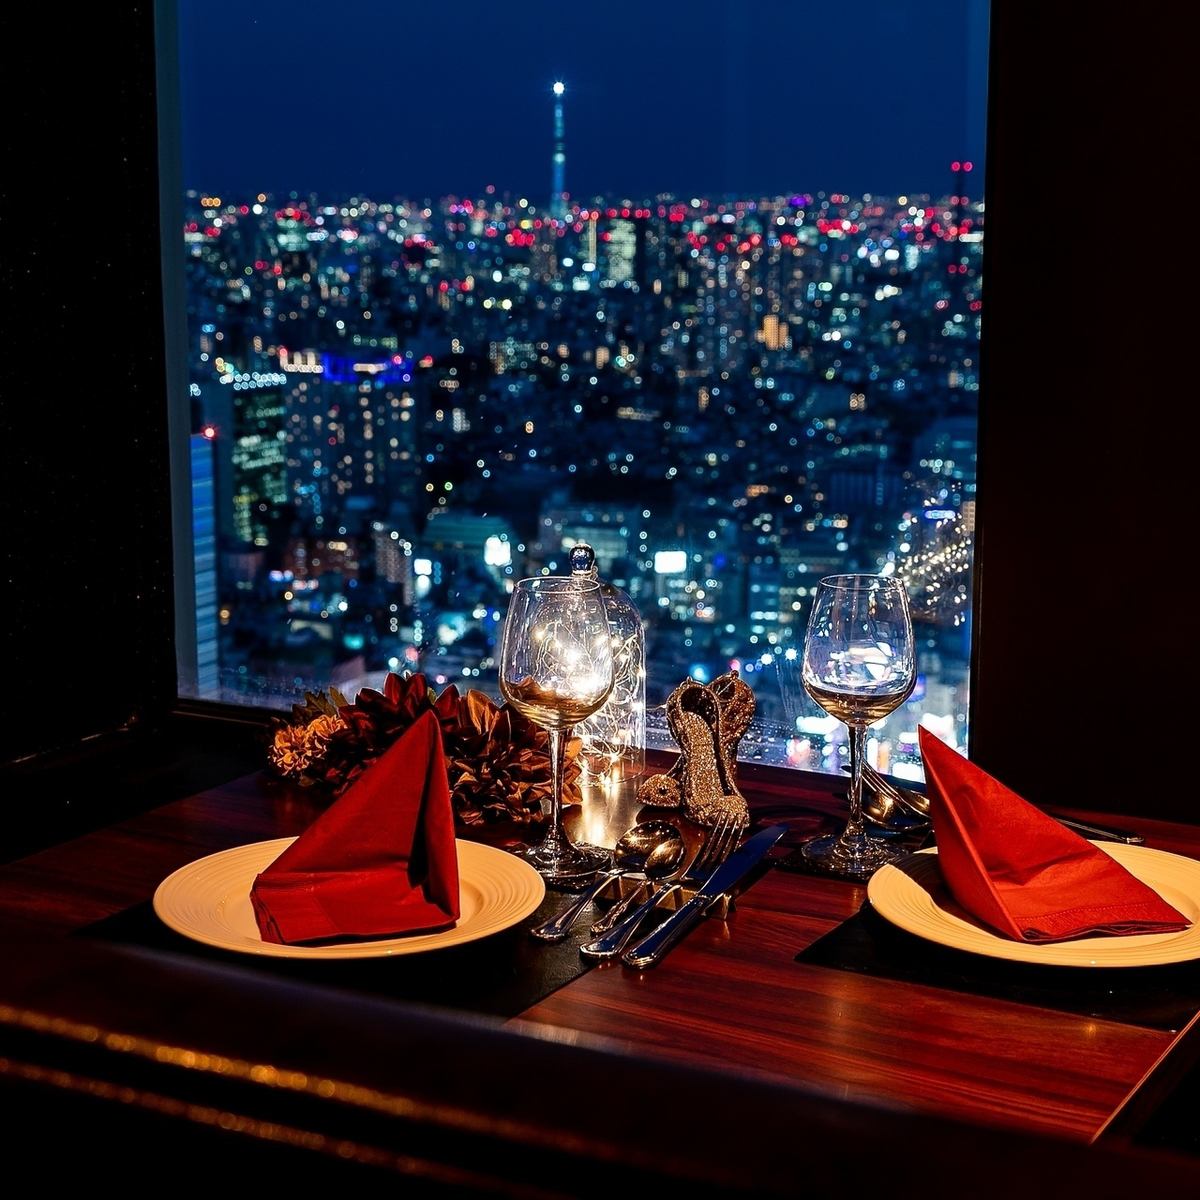 You can enjoy your meal while looking at the night view ☆ Perfect for birthdays and anniversaries ◎